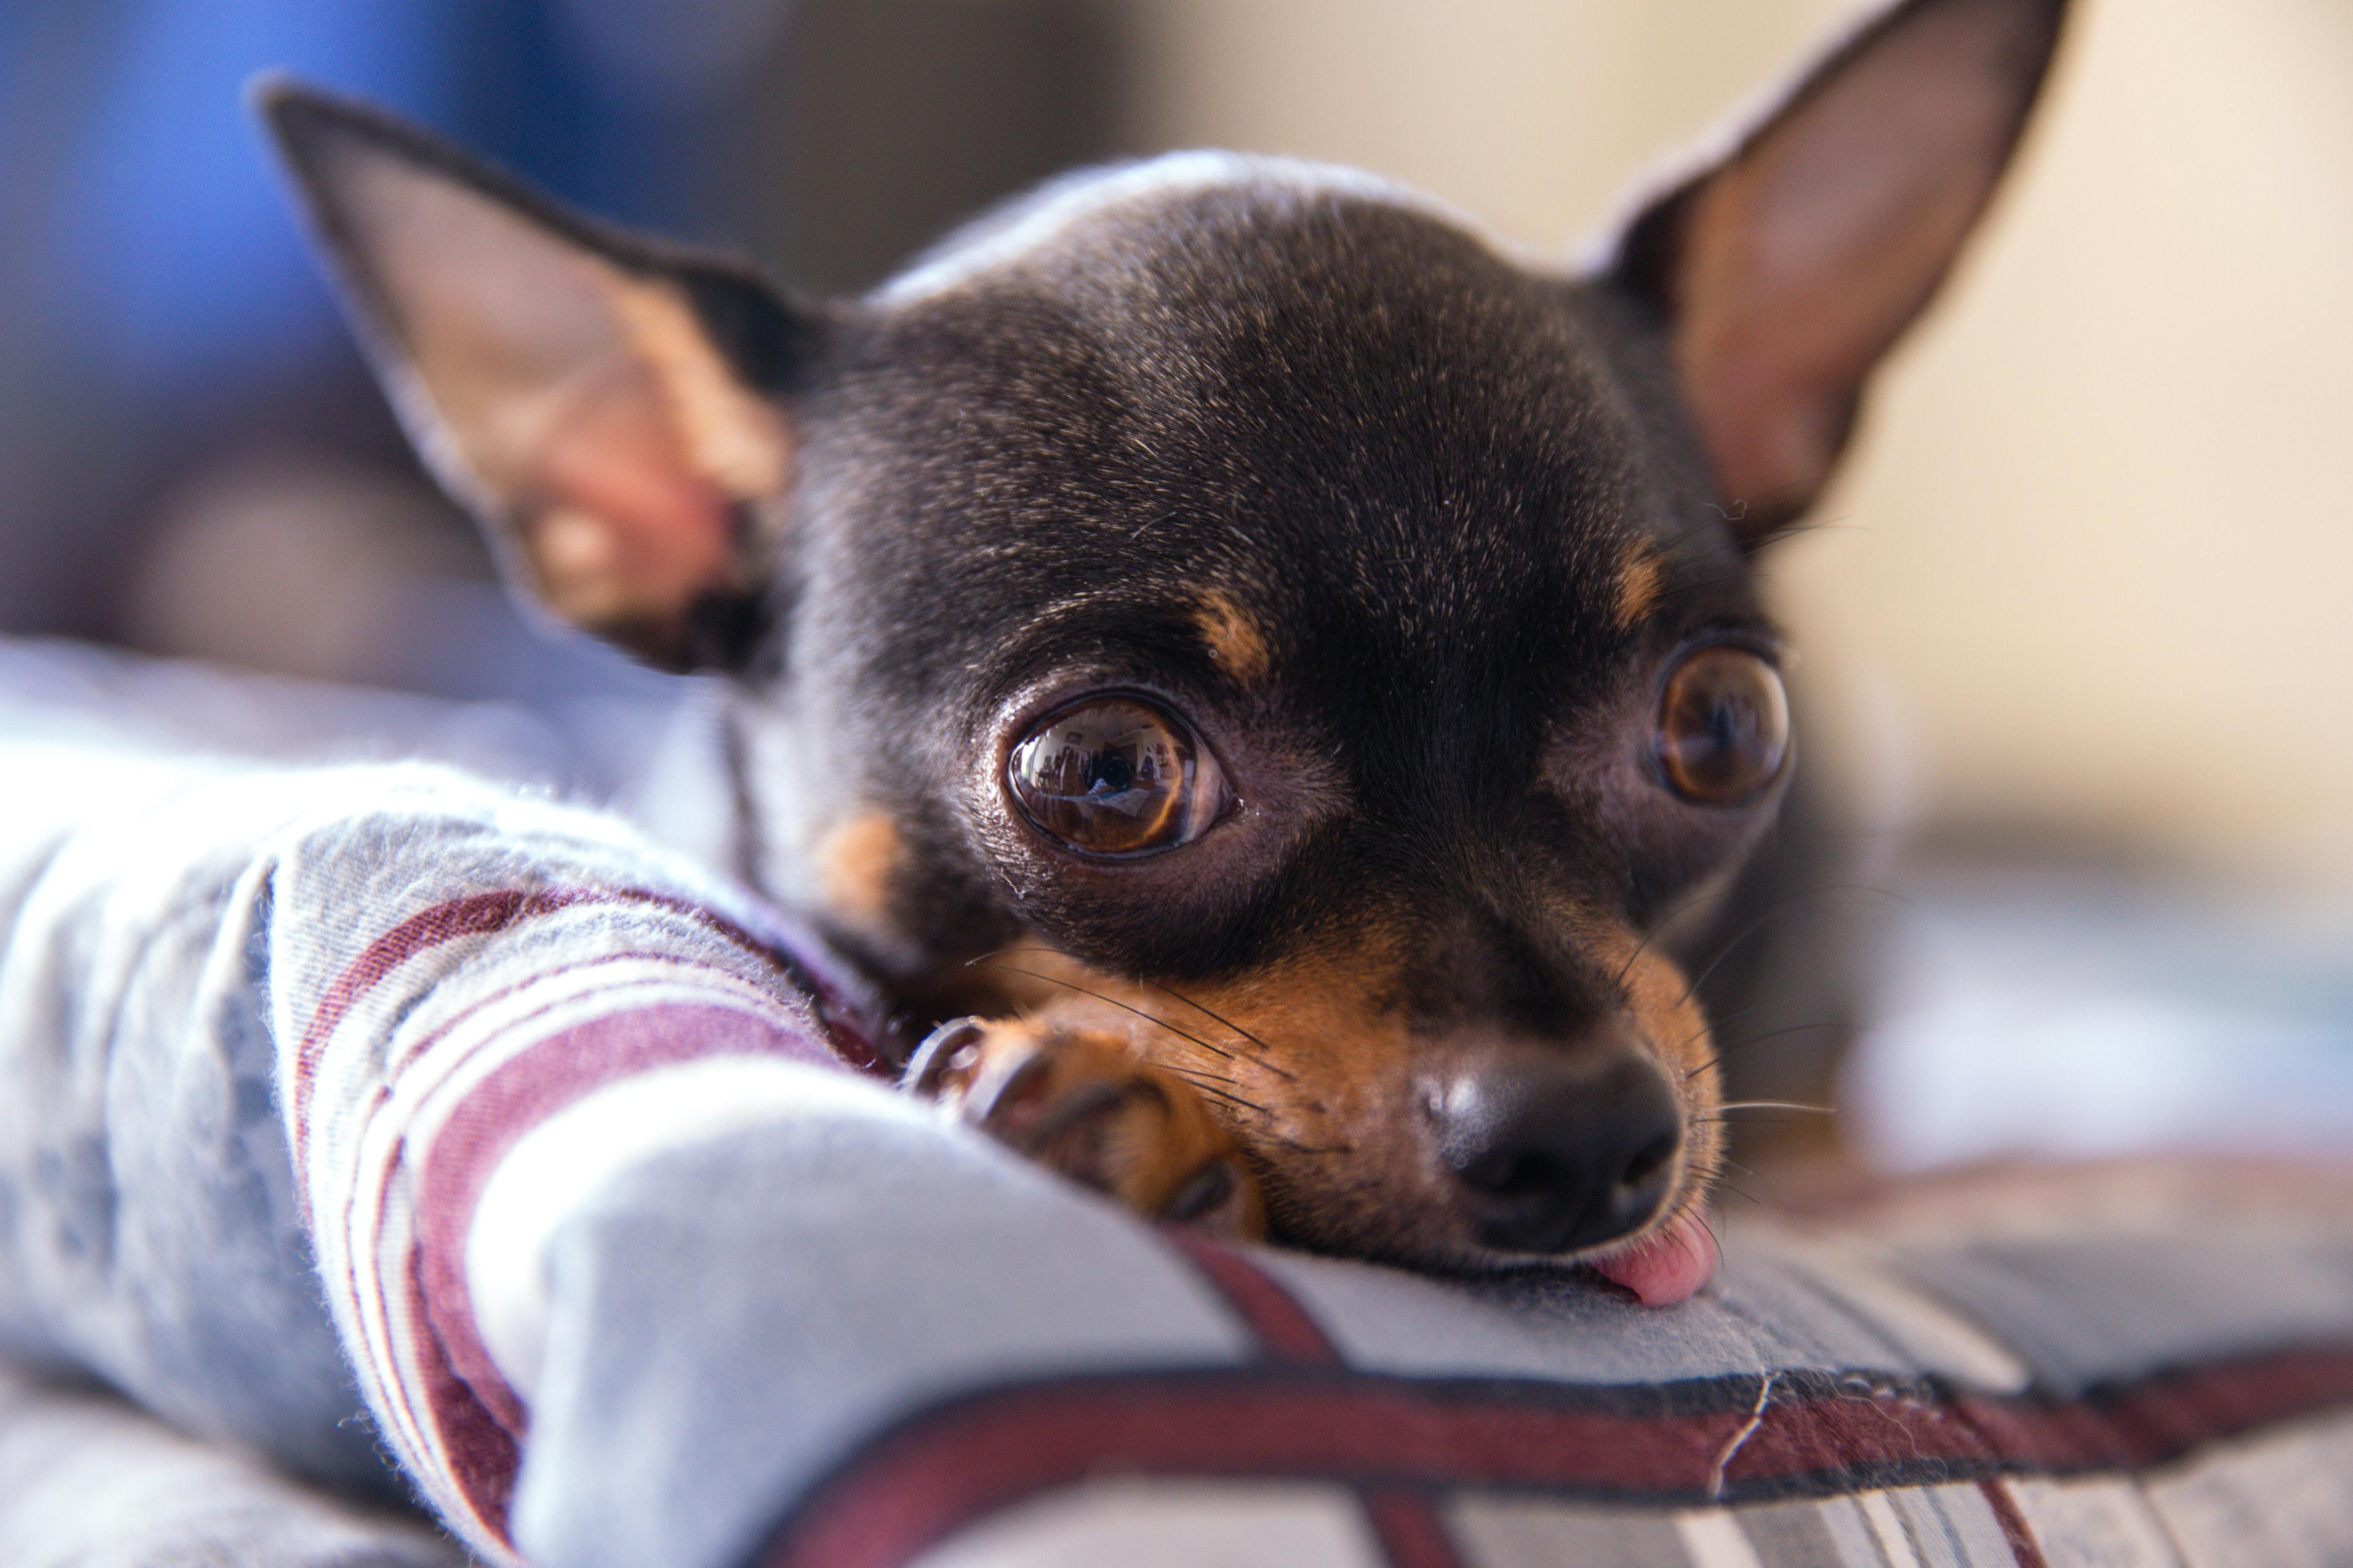 A Guide to Feeding Your Chihuahua: What Kind of Food Is Best?